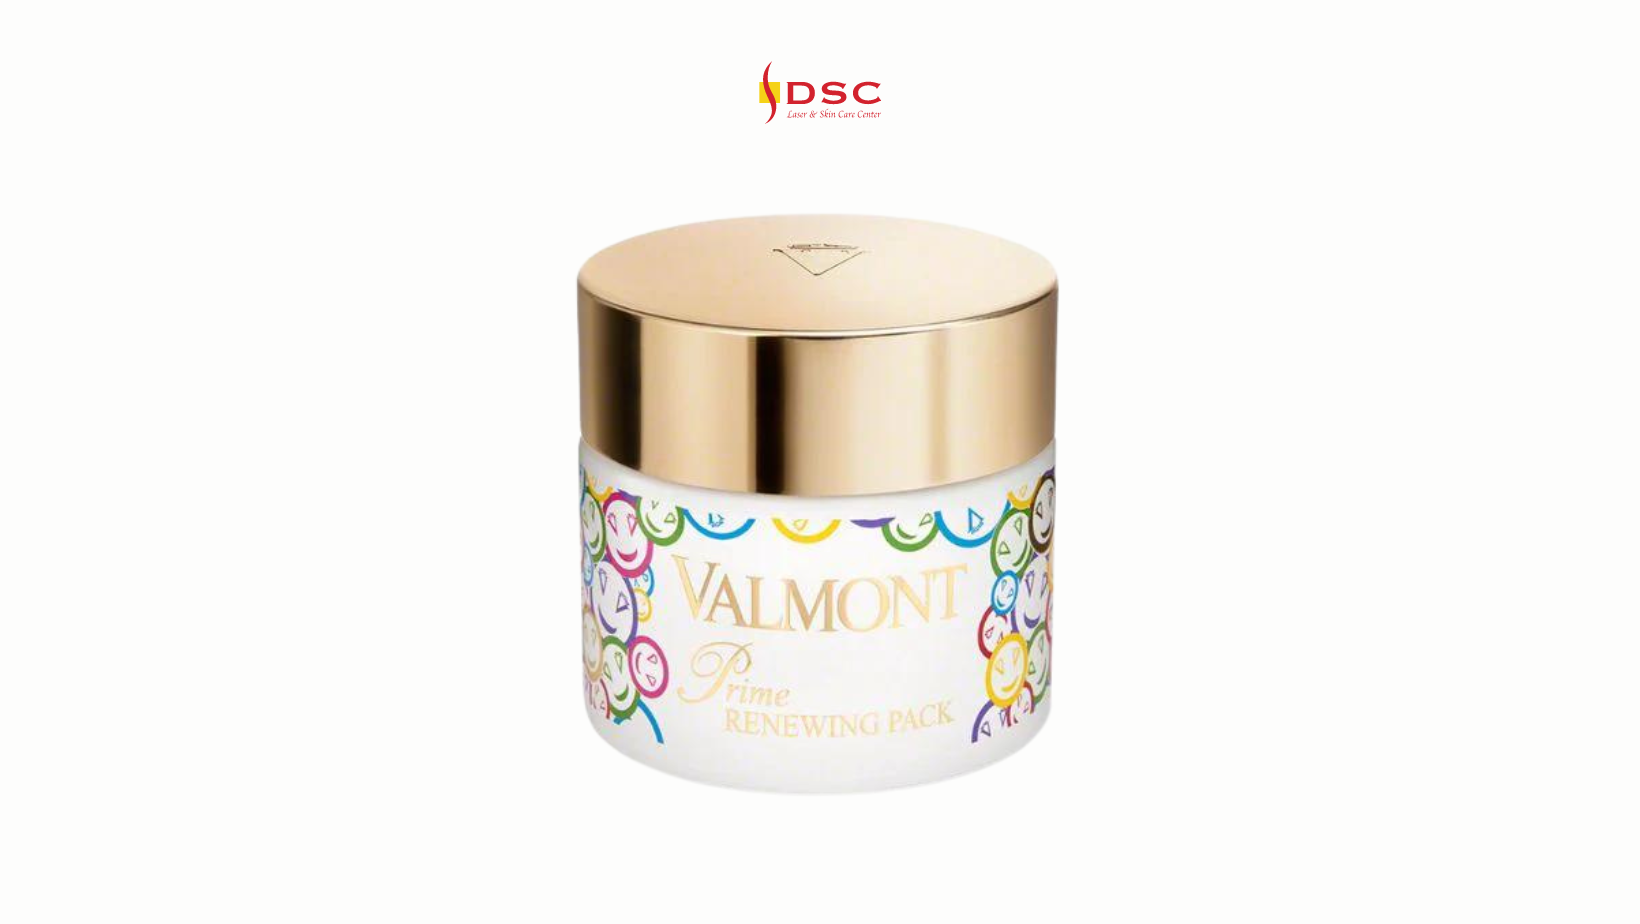 DSC 40th anniversary valmont prime renewing pack product image